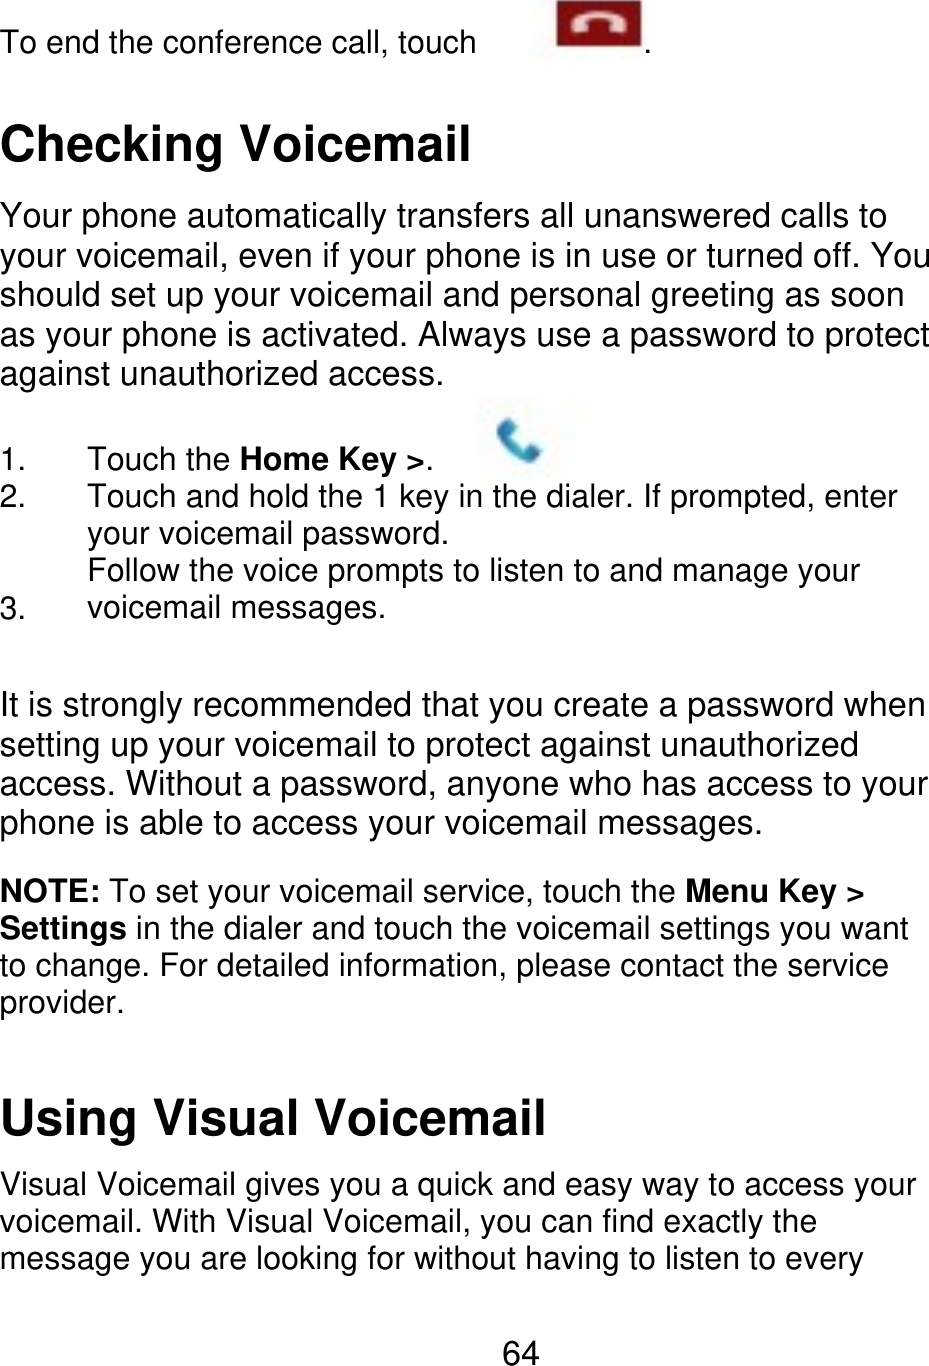 To end the conference call, touch . Checking Voicemail Your phone automatically transfers all unanswered calls to your voicemail, even if your phone is in use or turned off. You should set up your voicemail and personal greeting as soon as your phone is activated. Always use a password to protect against unauthorized access. 1. 2. 3. Touch the Home Key &gt;. Touch and hold the 1 key in the dialer. If prompted, enter your voicemail password. Follow the voice prompts to listen to and manage your voicemail messages. It is strongly recommended that you create a password when setting up your voicemail to protect against unauthorized access. Without a password, anyone who has access to your phone is able to access your voicemail messages. NOTE: To set your voicemail service, touch the Menu Key &gt; Settings in the dialer and touch the voicemail settings you want to change. For detailed information, please contact the service provider. Using Visual Voicemail Visual Voicemail gives you a quick and easy way to access your voicemail. With Visual Voicemail, you can find exactly the message you are looking for without having to listen to every 64 